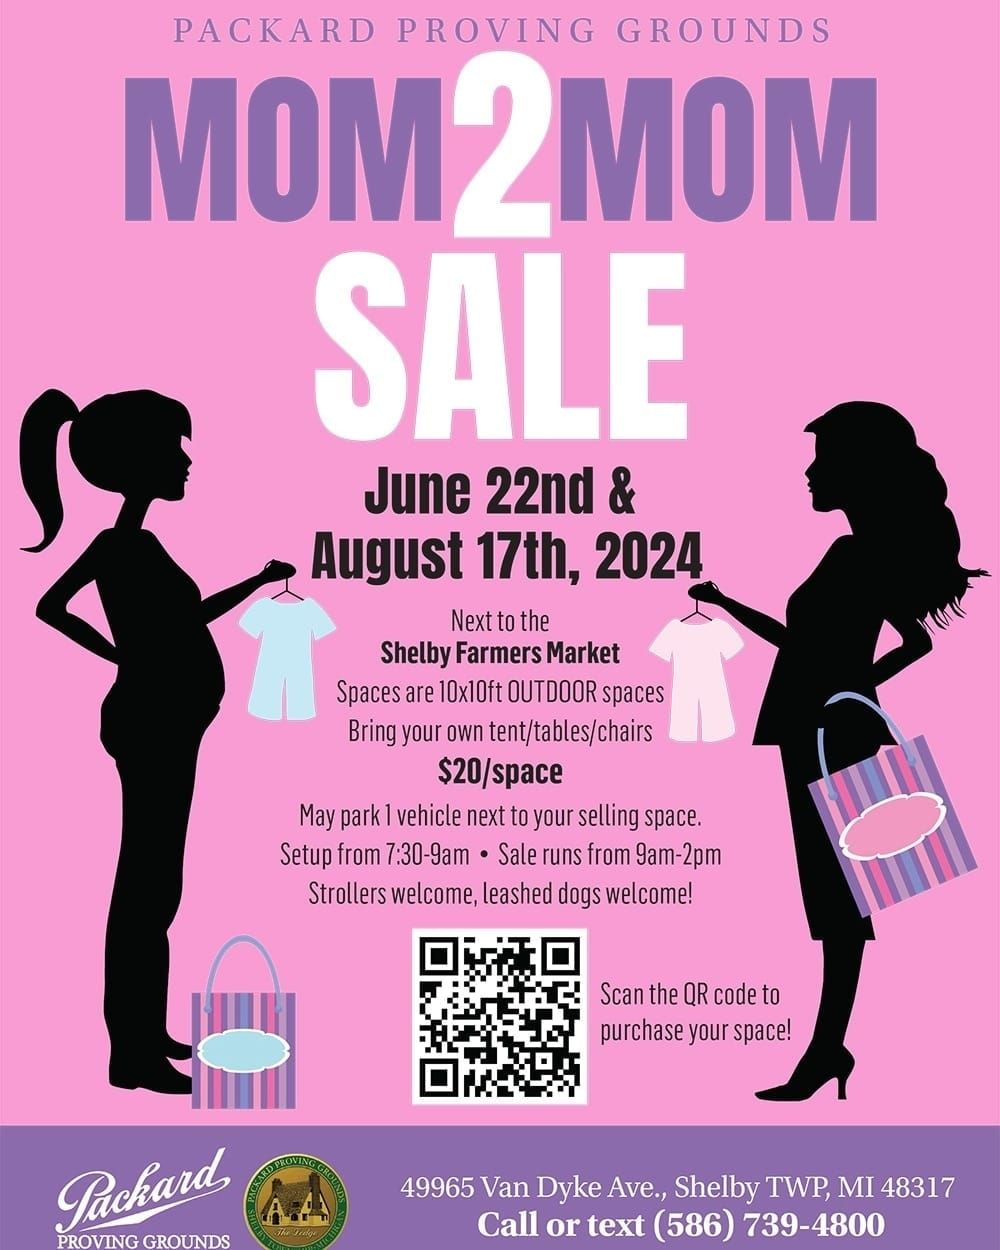 Mom2Mom Sale at the Shelby Farmers Market